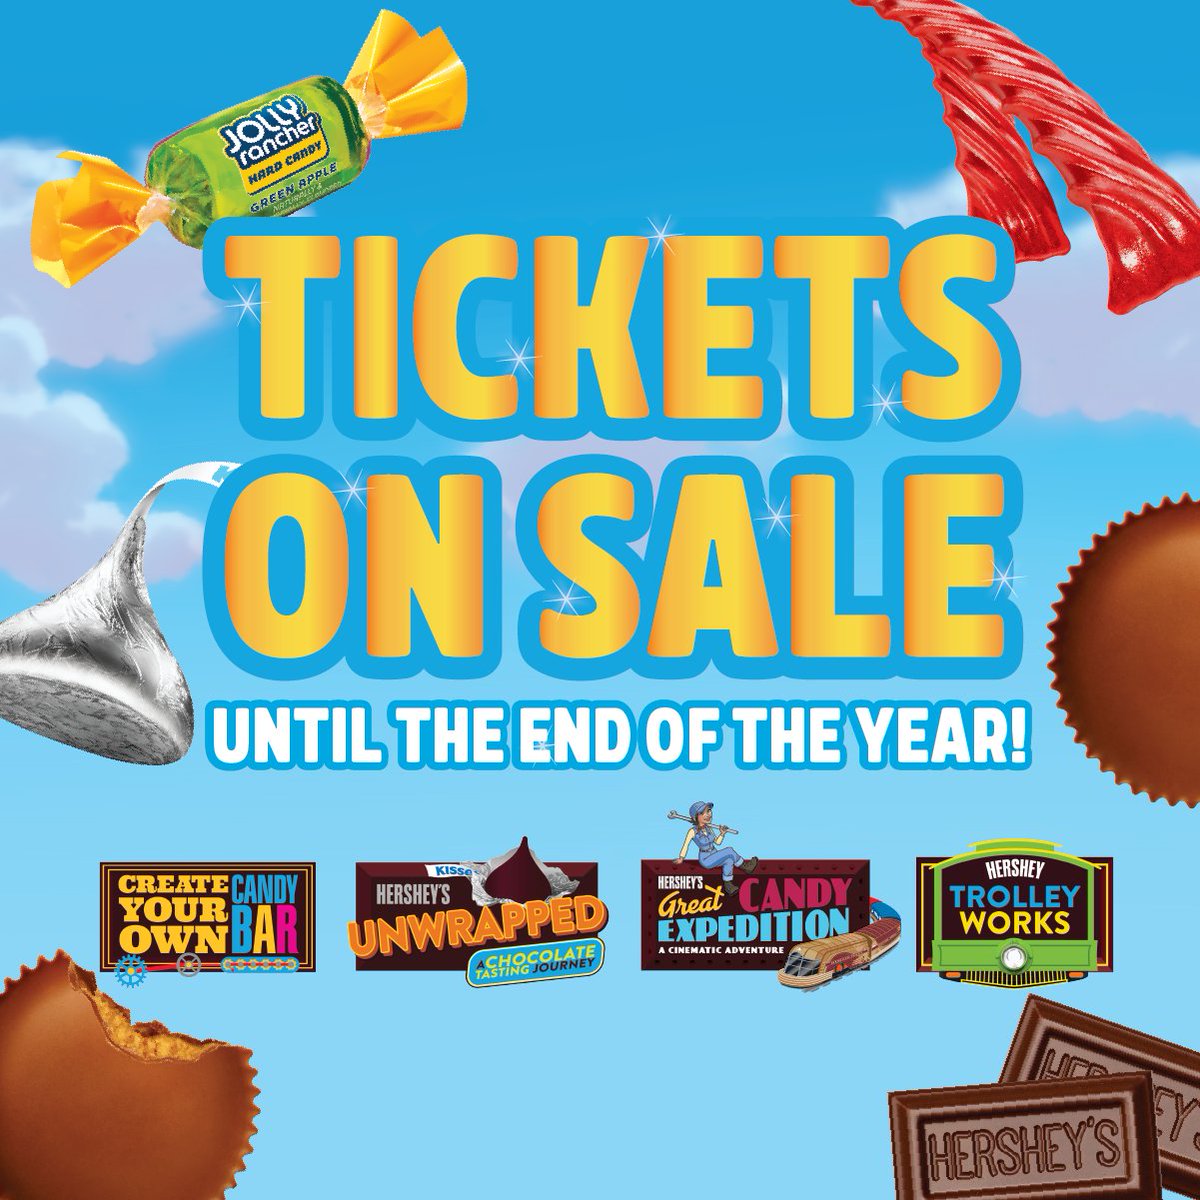 Our tickets are now on sale with dates through the end of the year! 🍫 Be sure to book your trip in advance, so you don't miss out! spr.ly/6012O7Vds